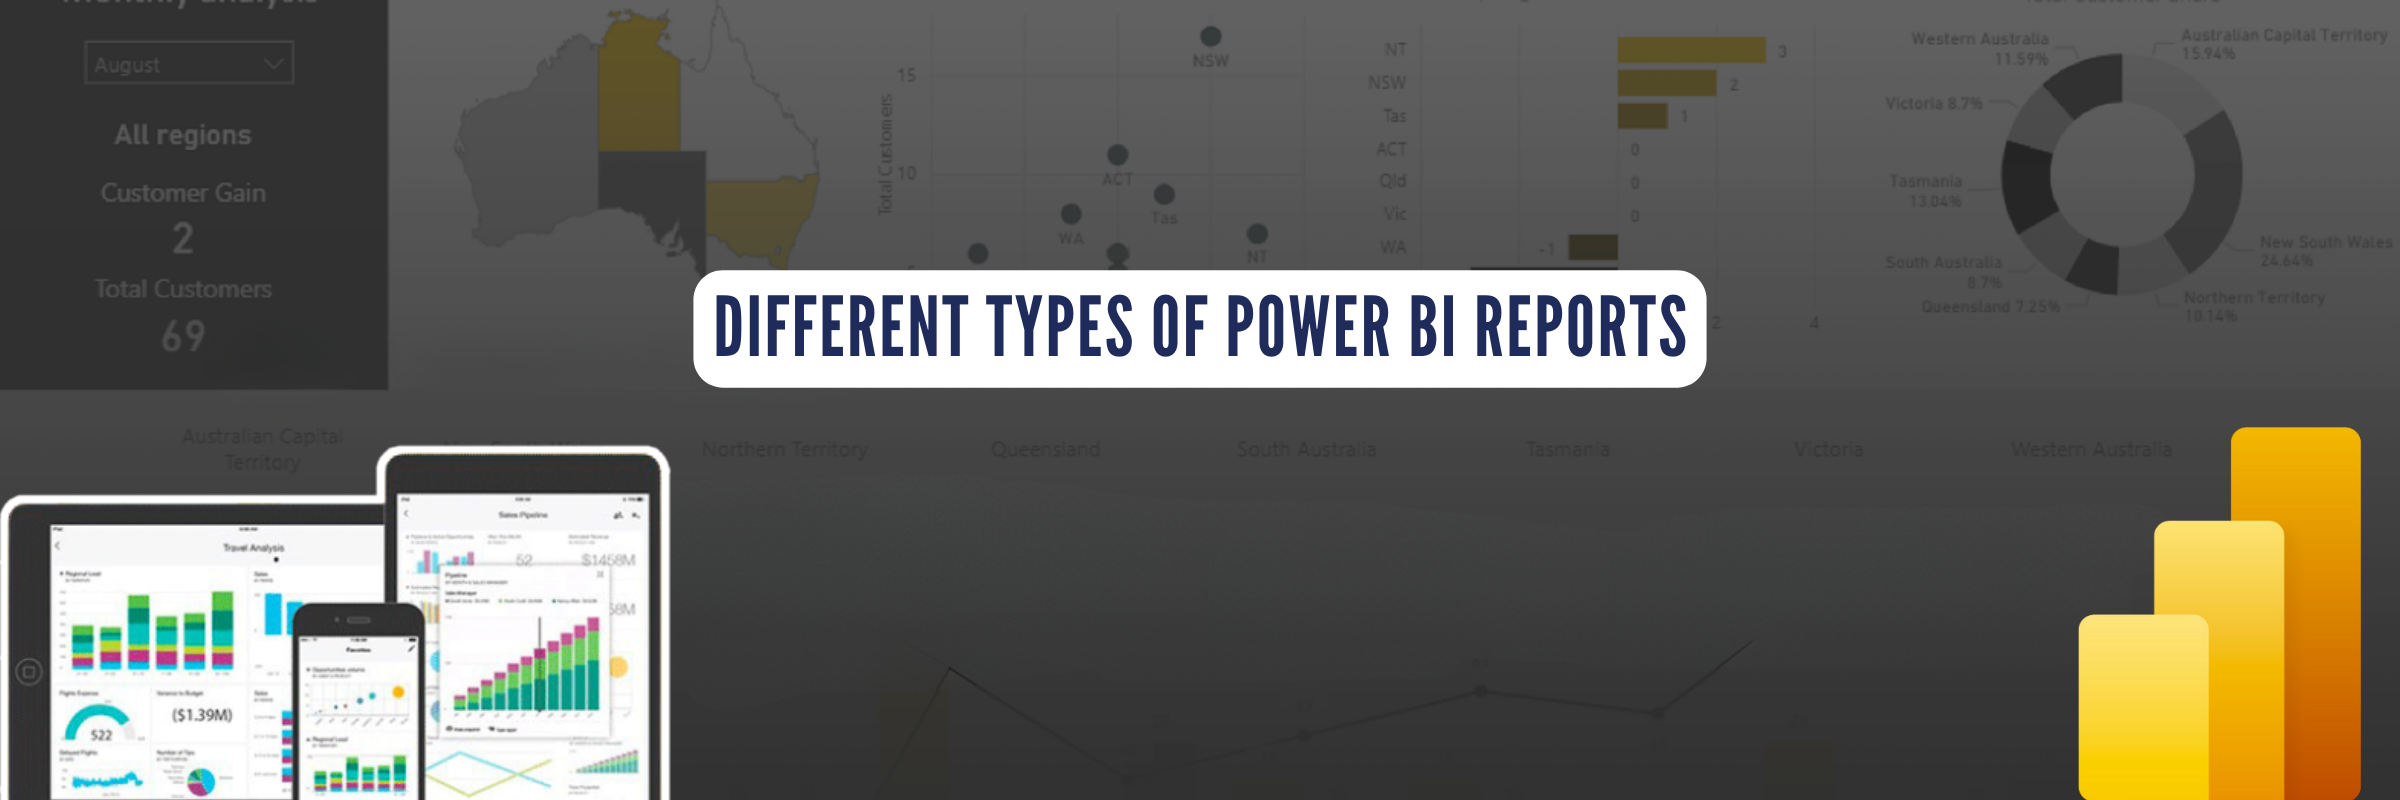 10 Different Types of Power BI Reports